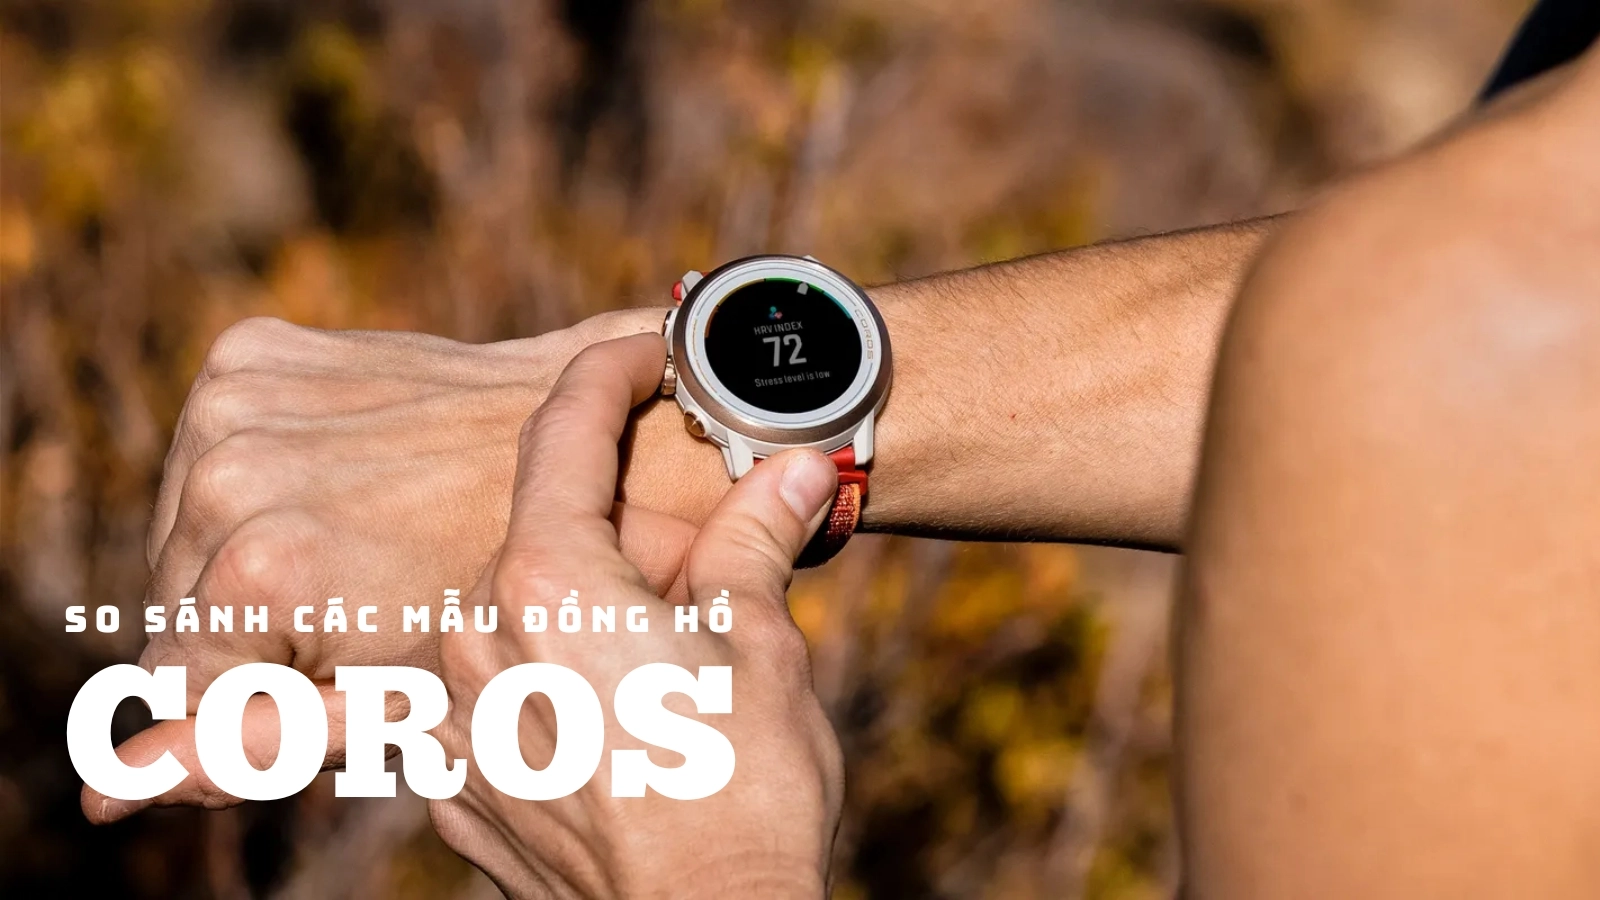 COMPARISON OF COROS GPS WATCHES